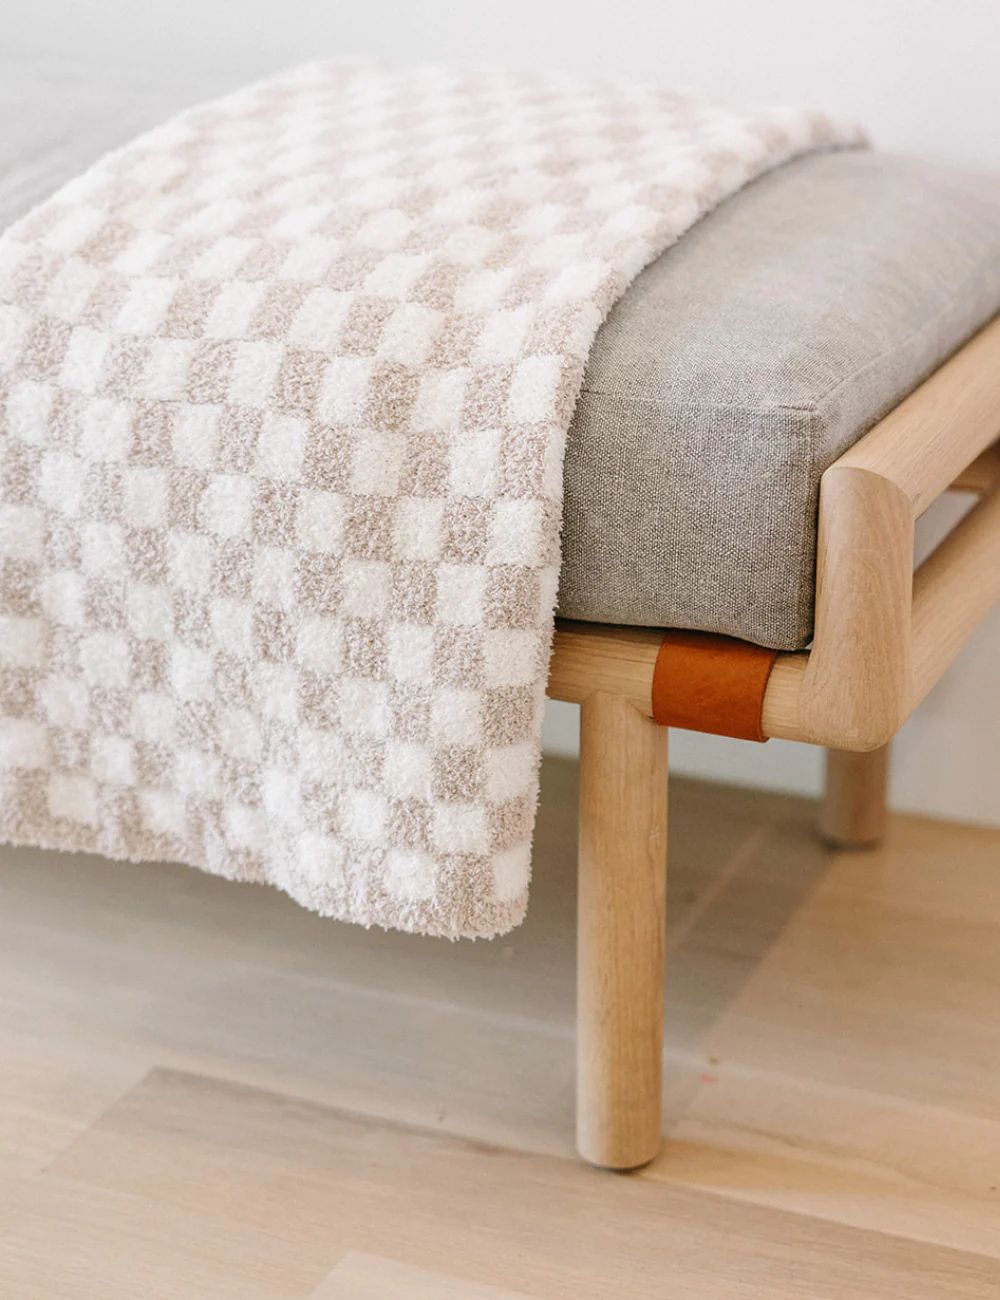 TSC x Madi Nelson: Mini Checkered Full Size Buttery Blankets | The Styled Collection